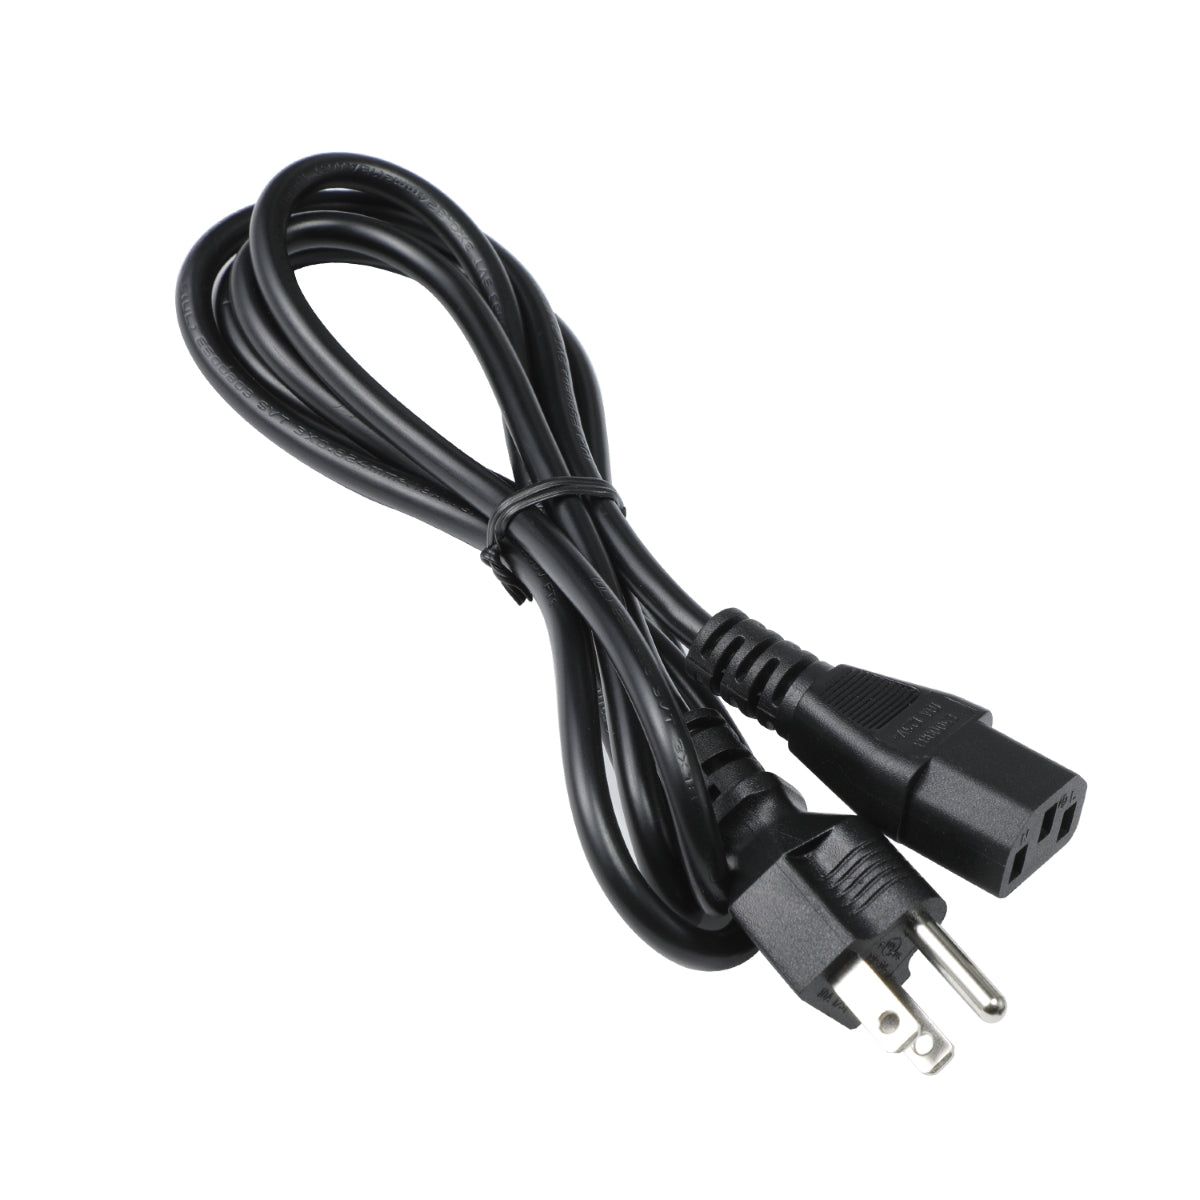 Power Cord for Dell S2719DGF Monitor.